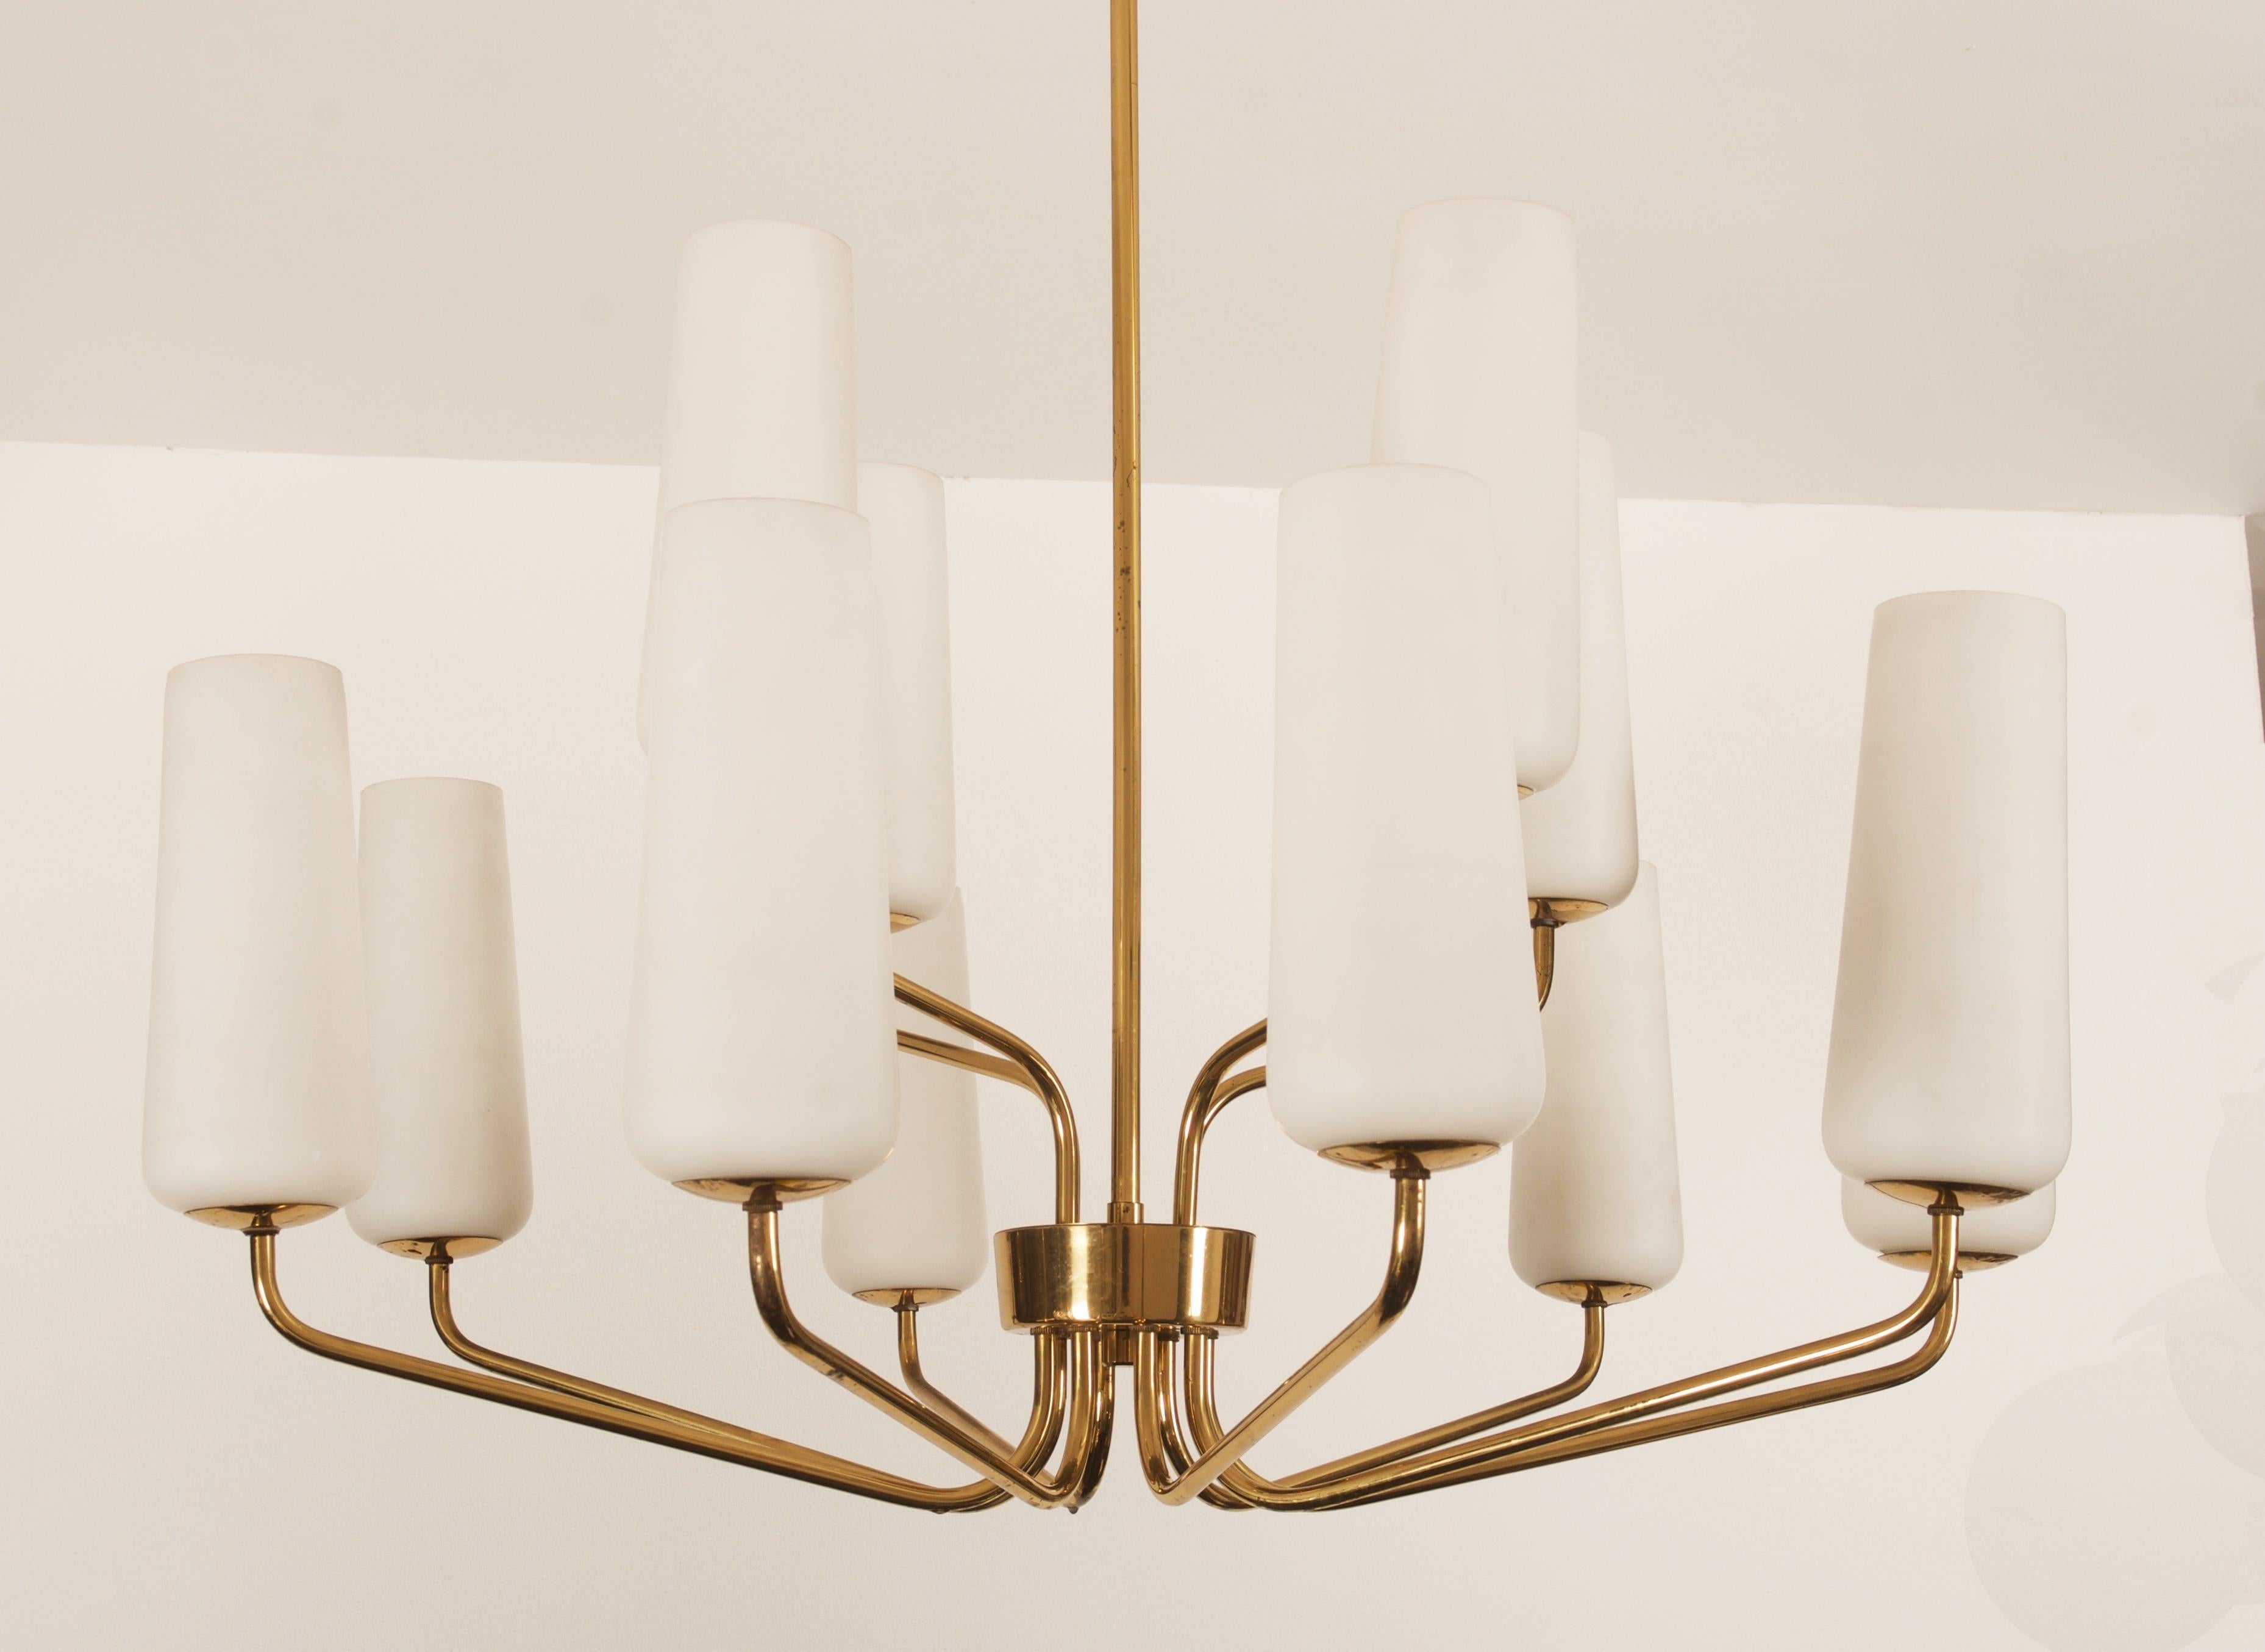 Brass construction with twelve arms and opaline glass shades each fitted with E14 sockets. Made in Vienna by Rupert Nikoll in the early 1950s.
Total height can be customized.
Up to 2 pieces available price per lamp.